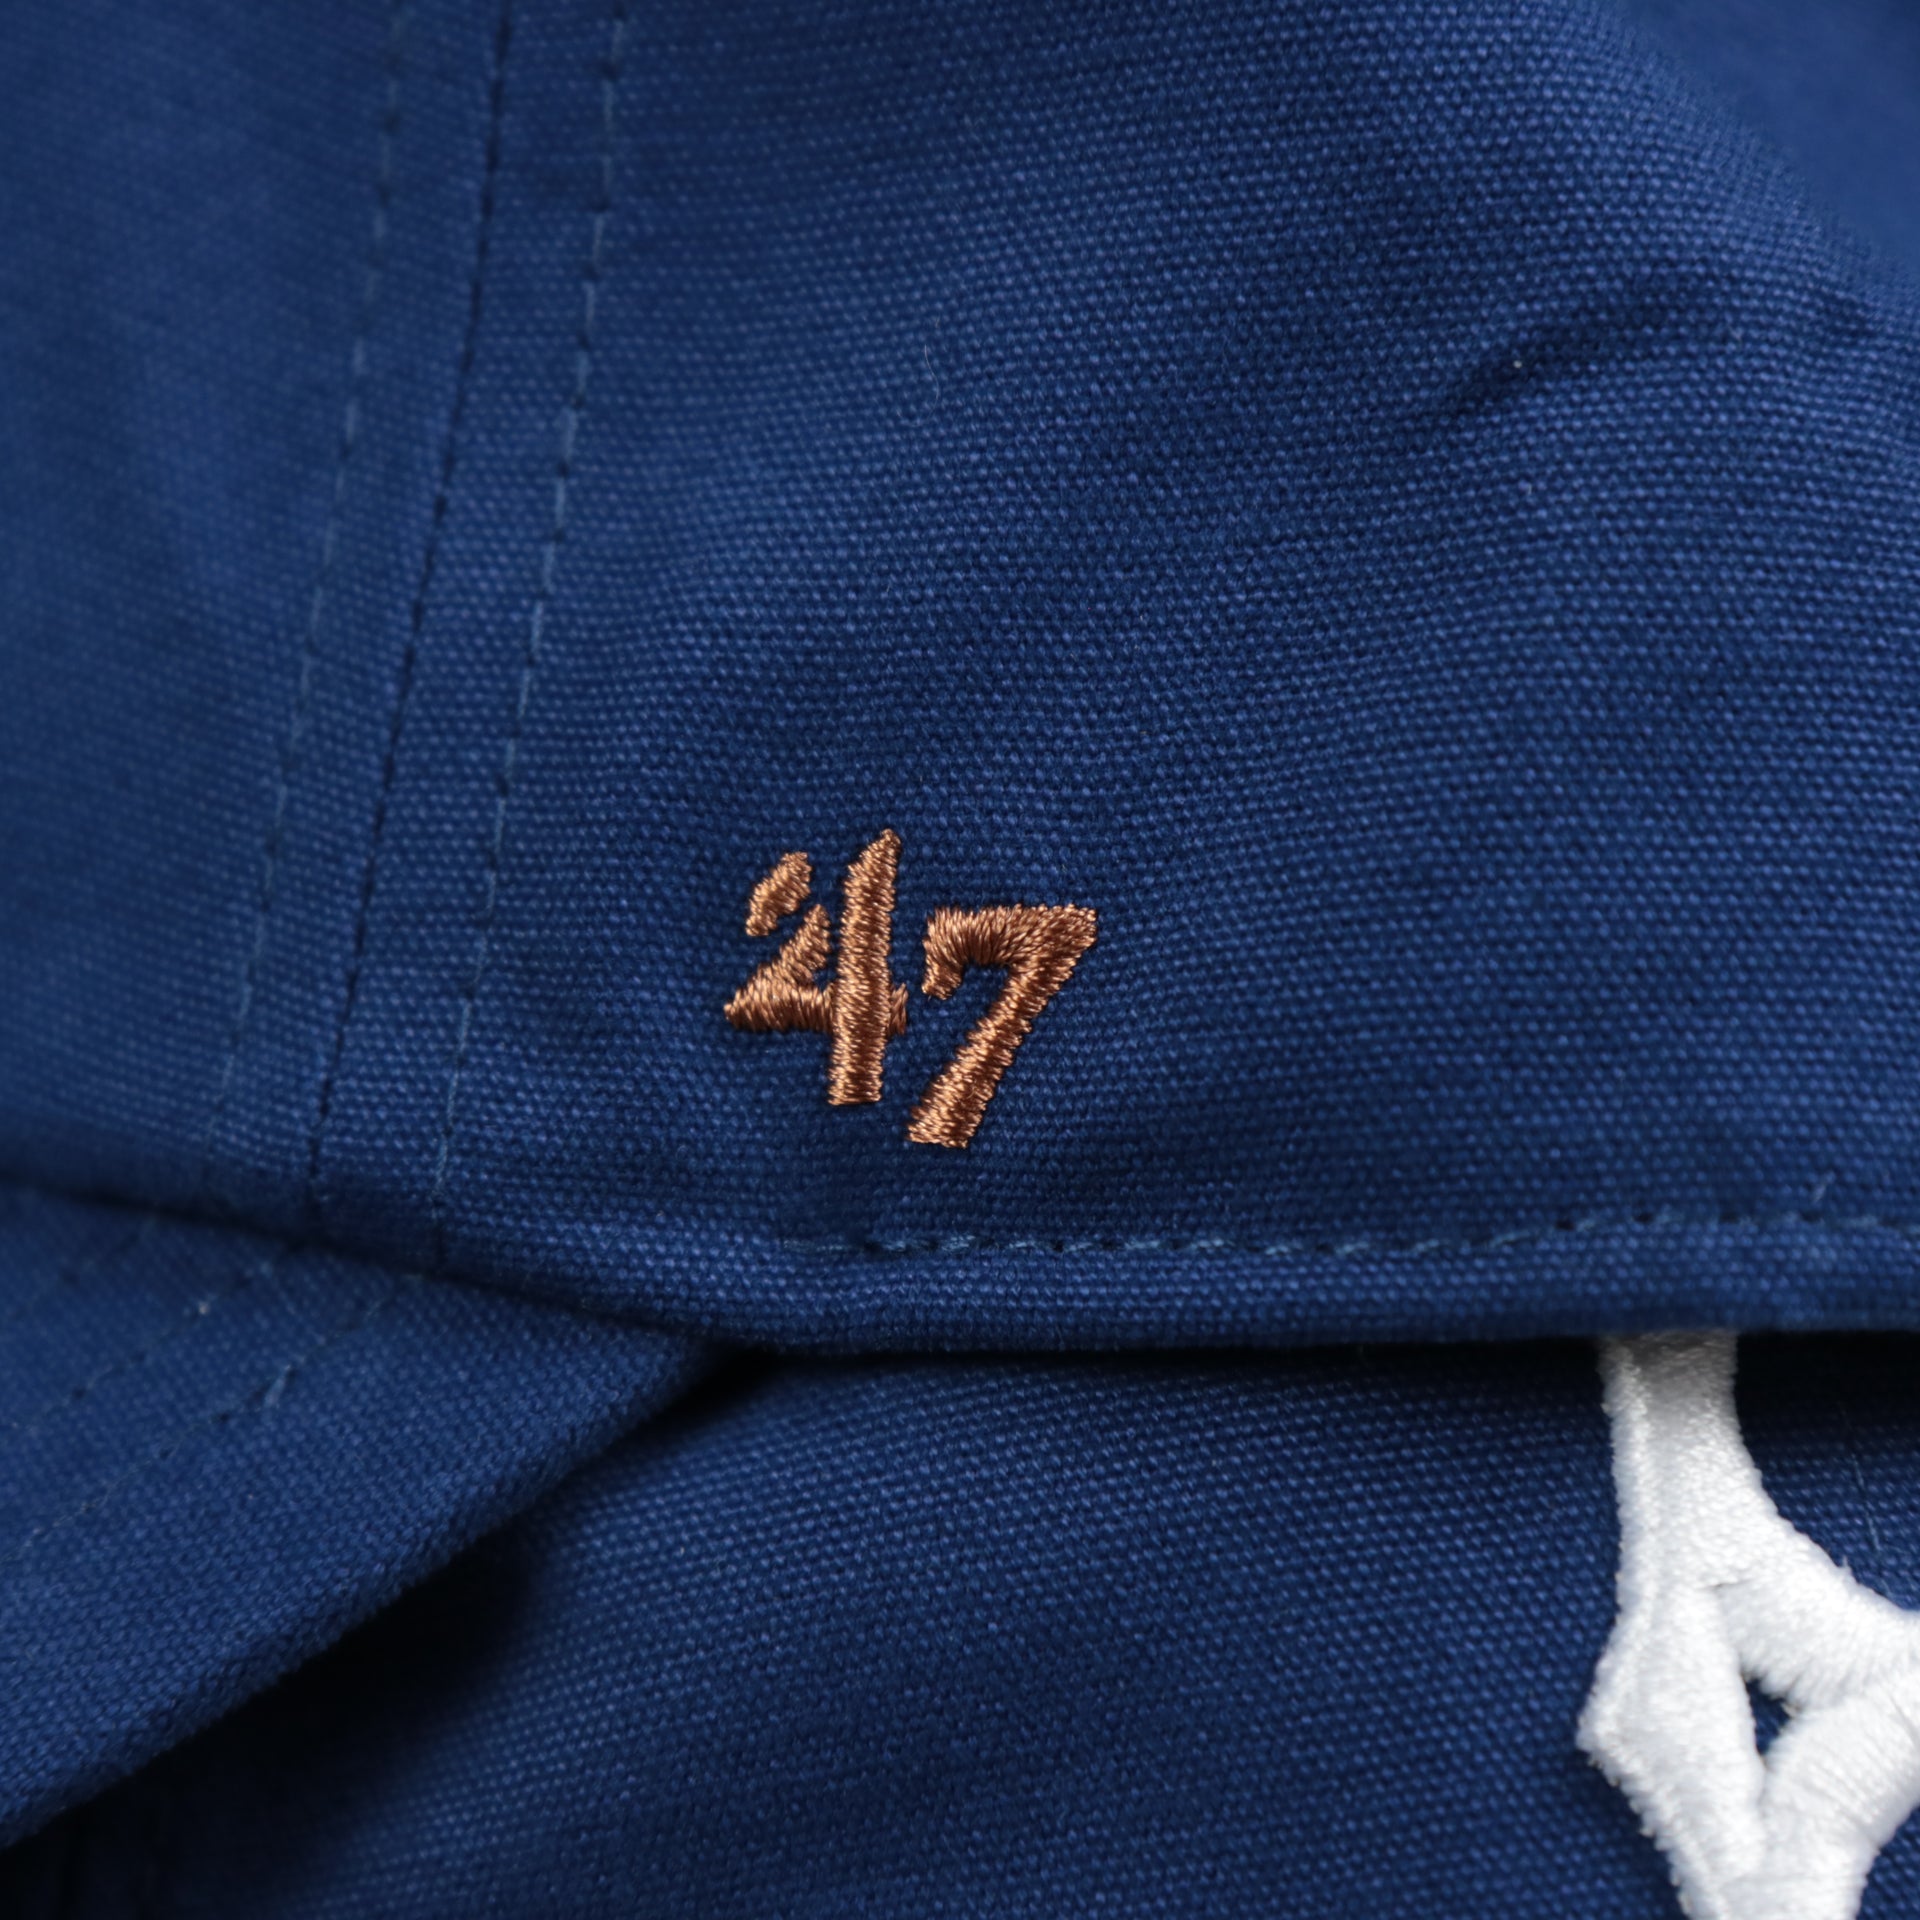 The 47 Brand Logo embroidered in white